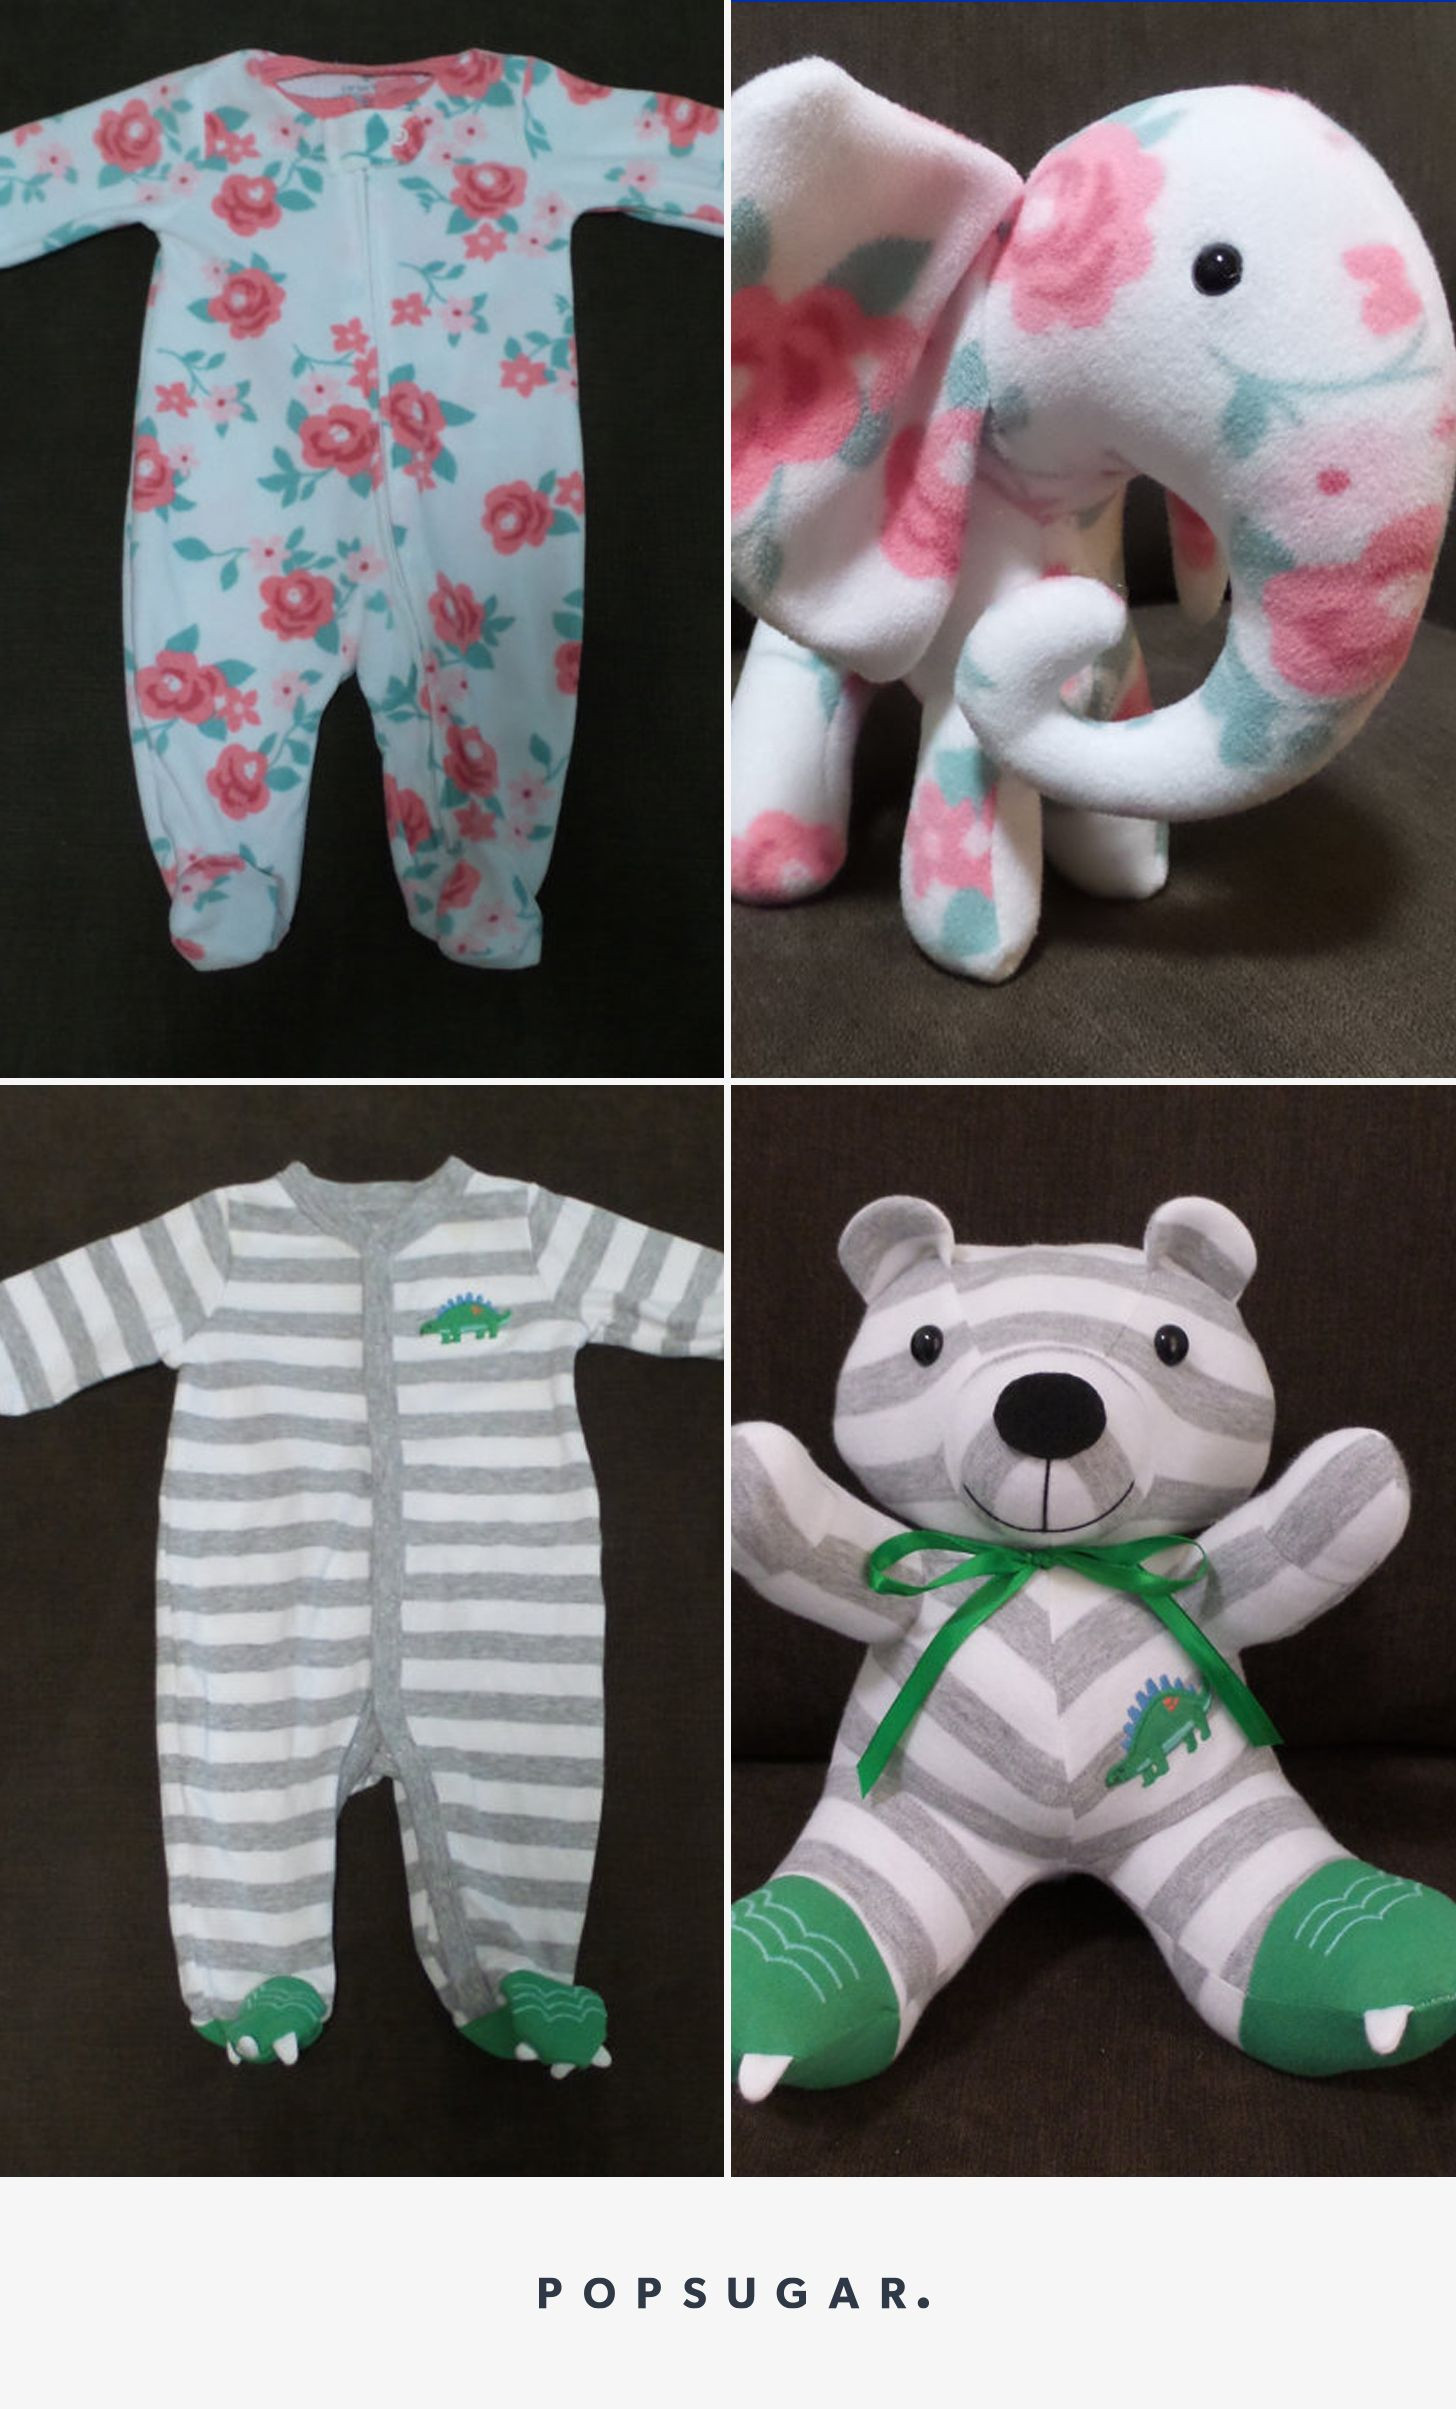 Crafts To Do With Baby
 The Coolest Thing You Can Do With Your Baby s Old esies